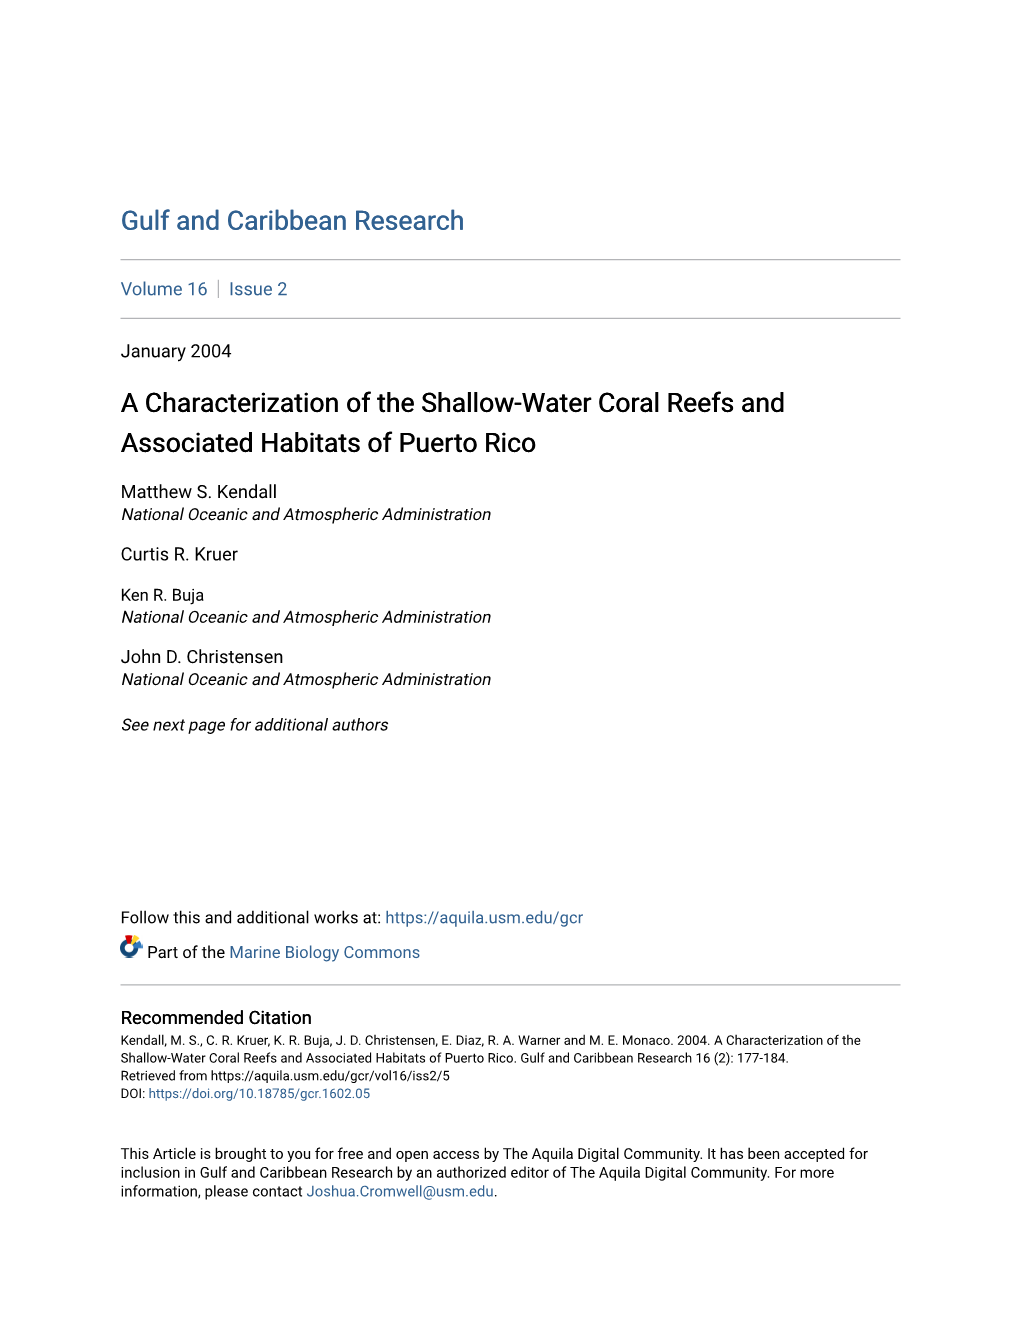 A Characterization of the Shallow-Water Coral Reefs and Associated Habitats of Puerto Rico